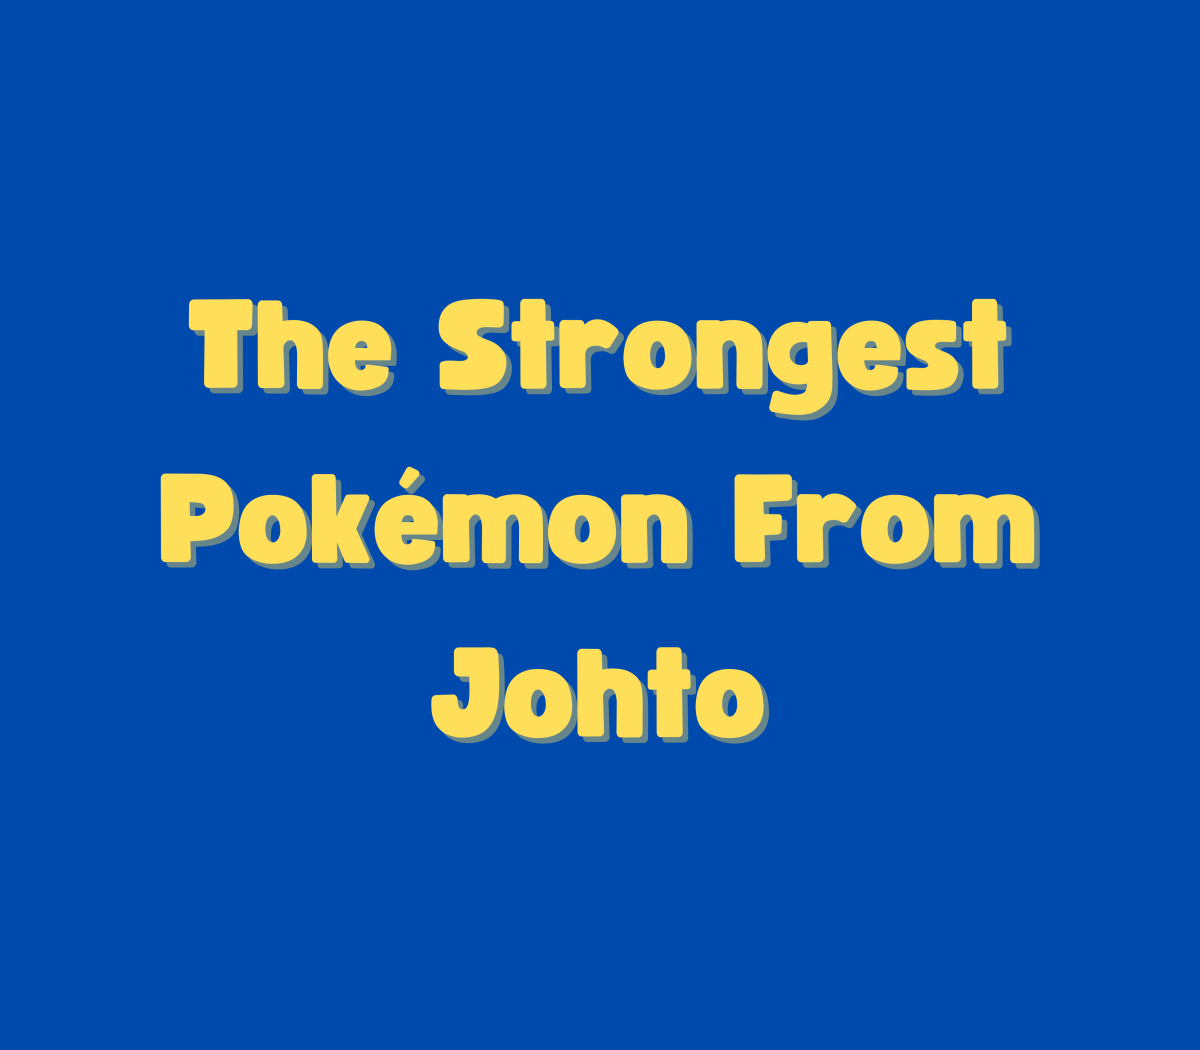 Who are the strongest Pokémon from the second generation?